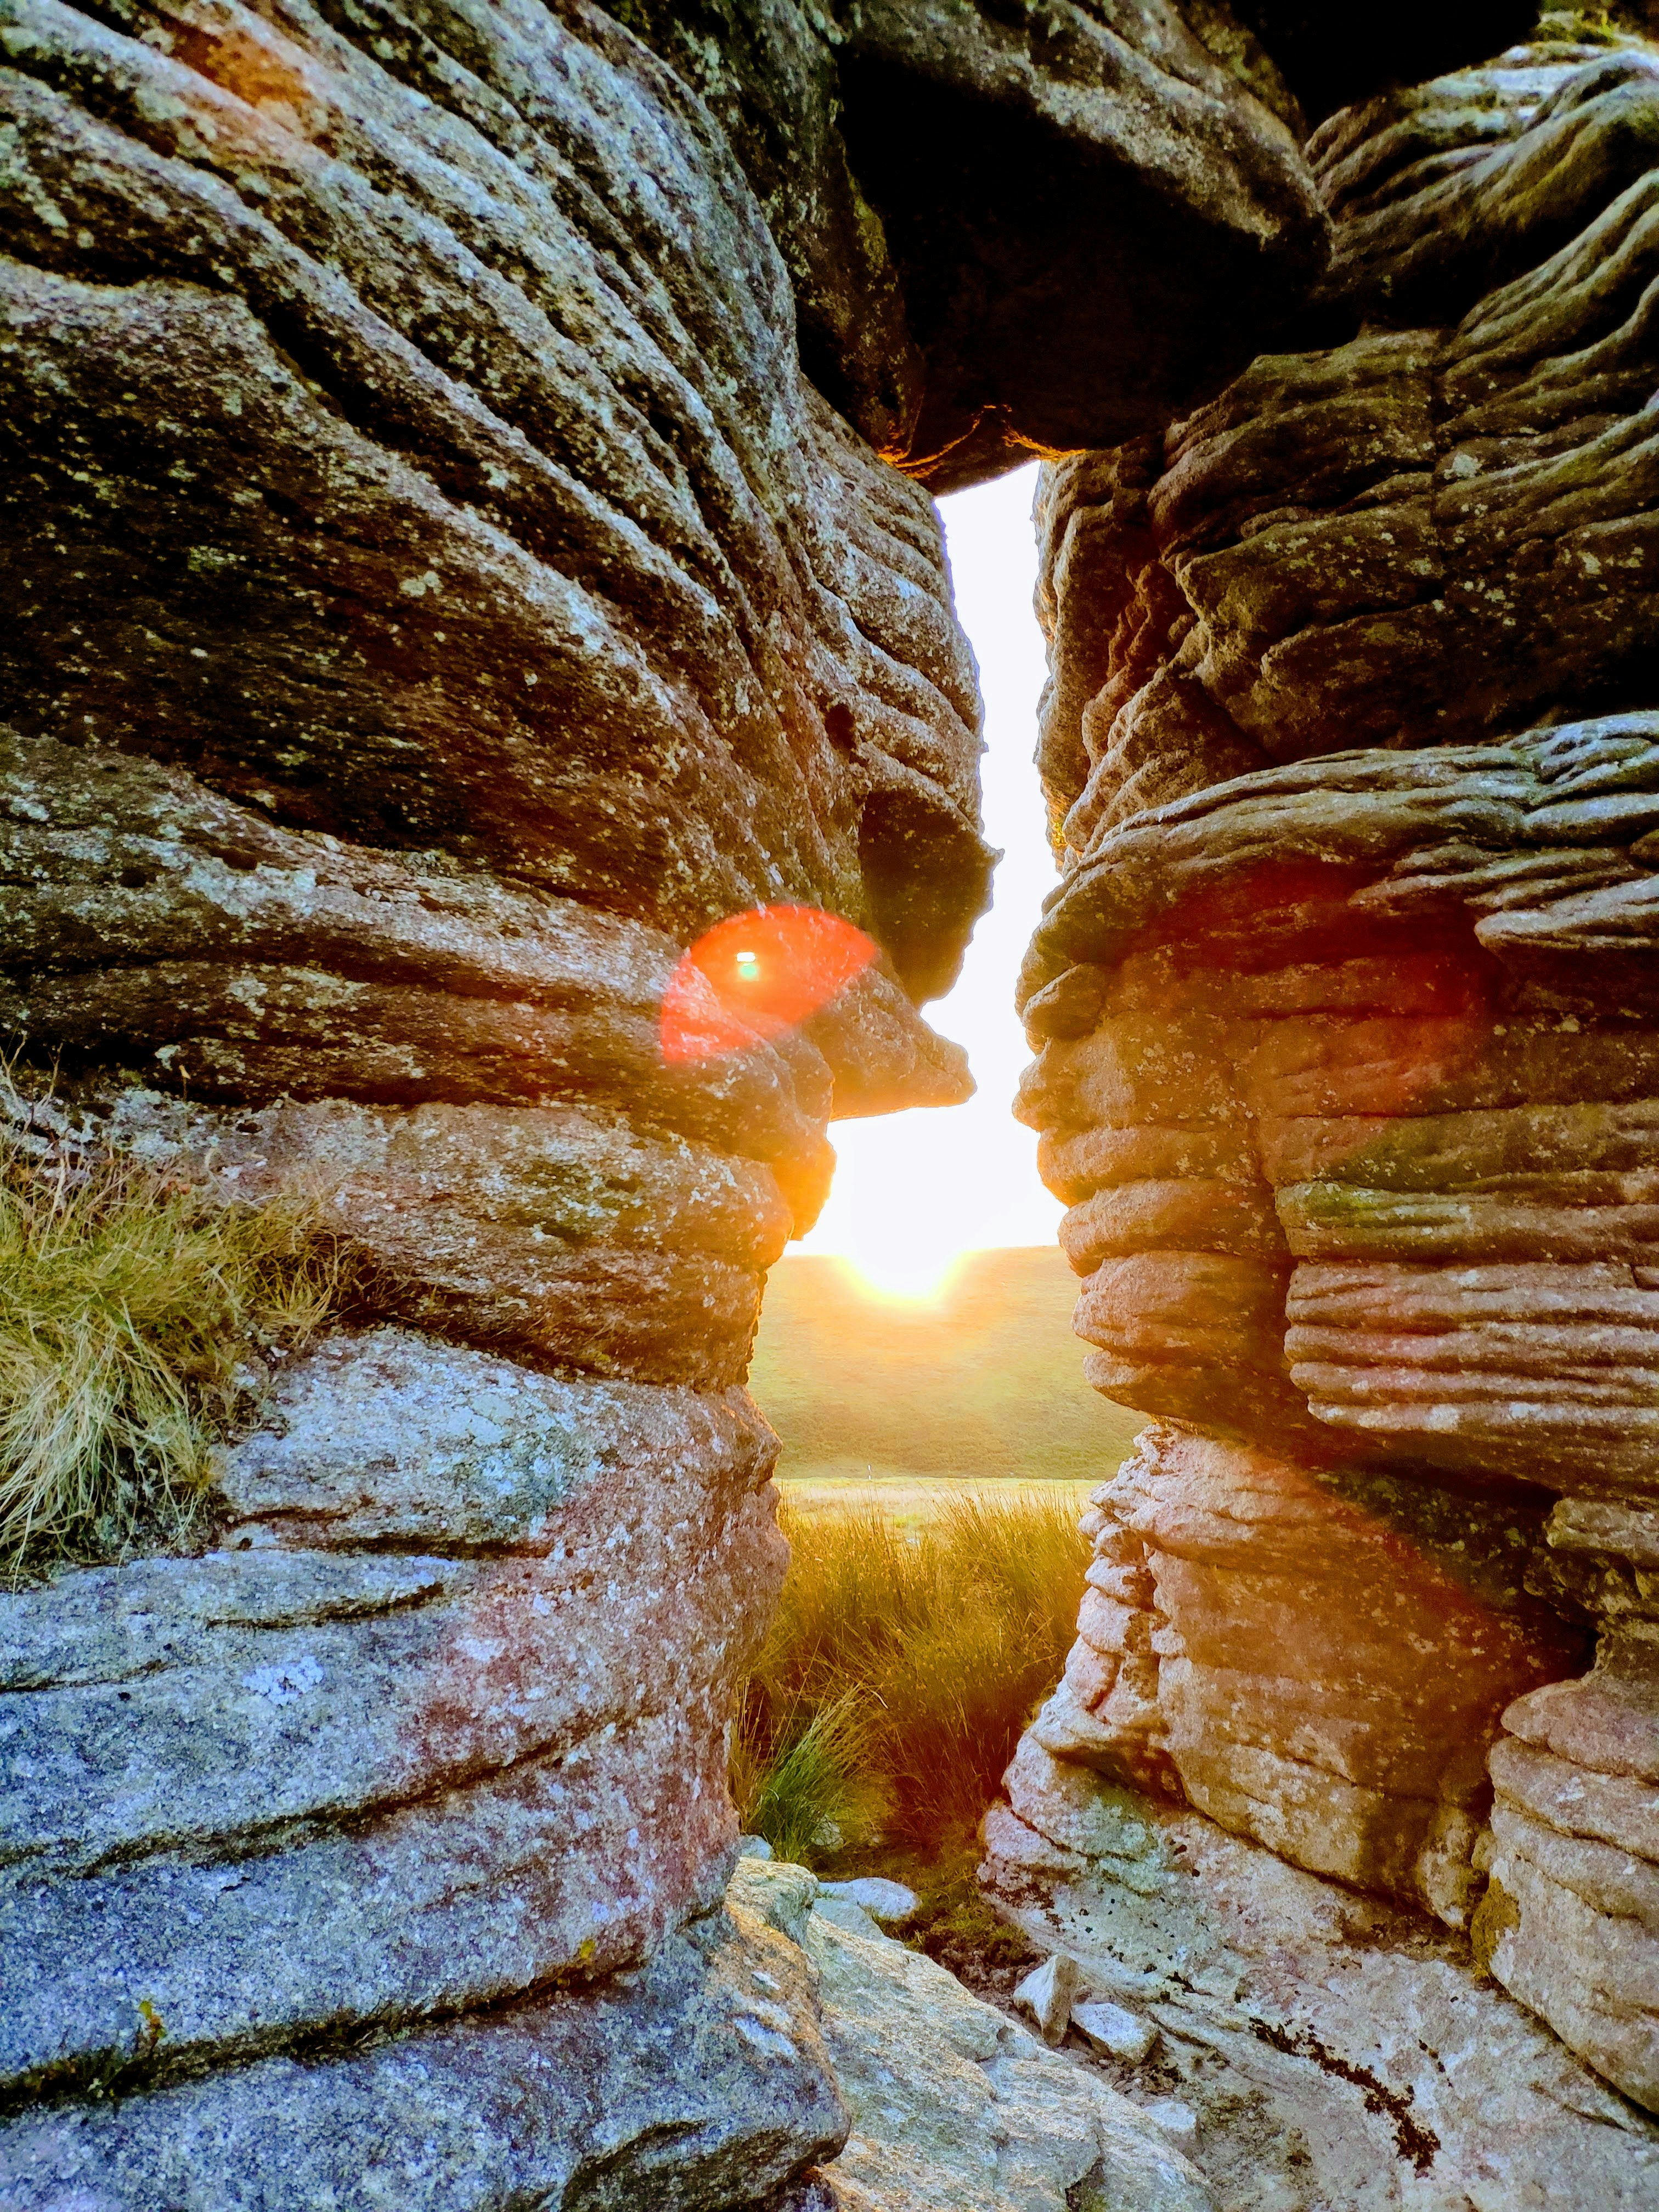 Stylised view of the sunset through the "Thurlstone" of Watern Tor, with aggressive lens flare seen.